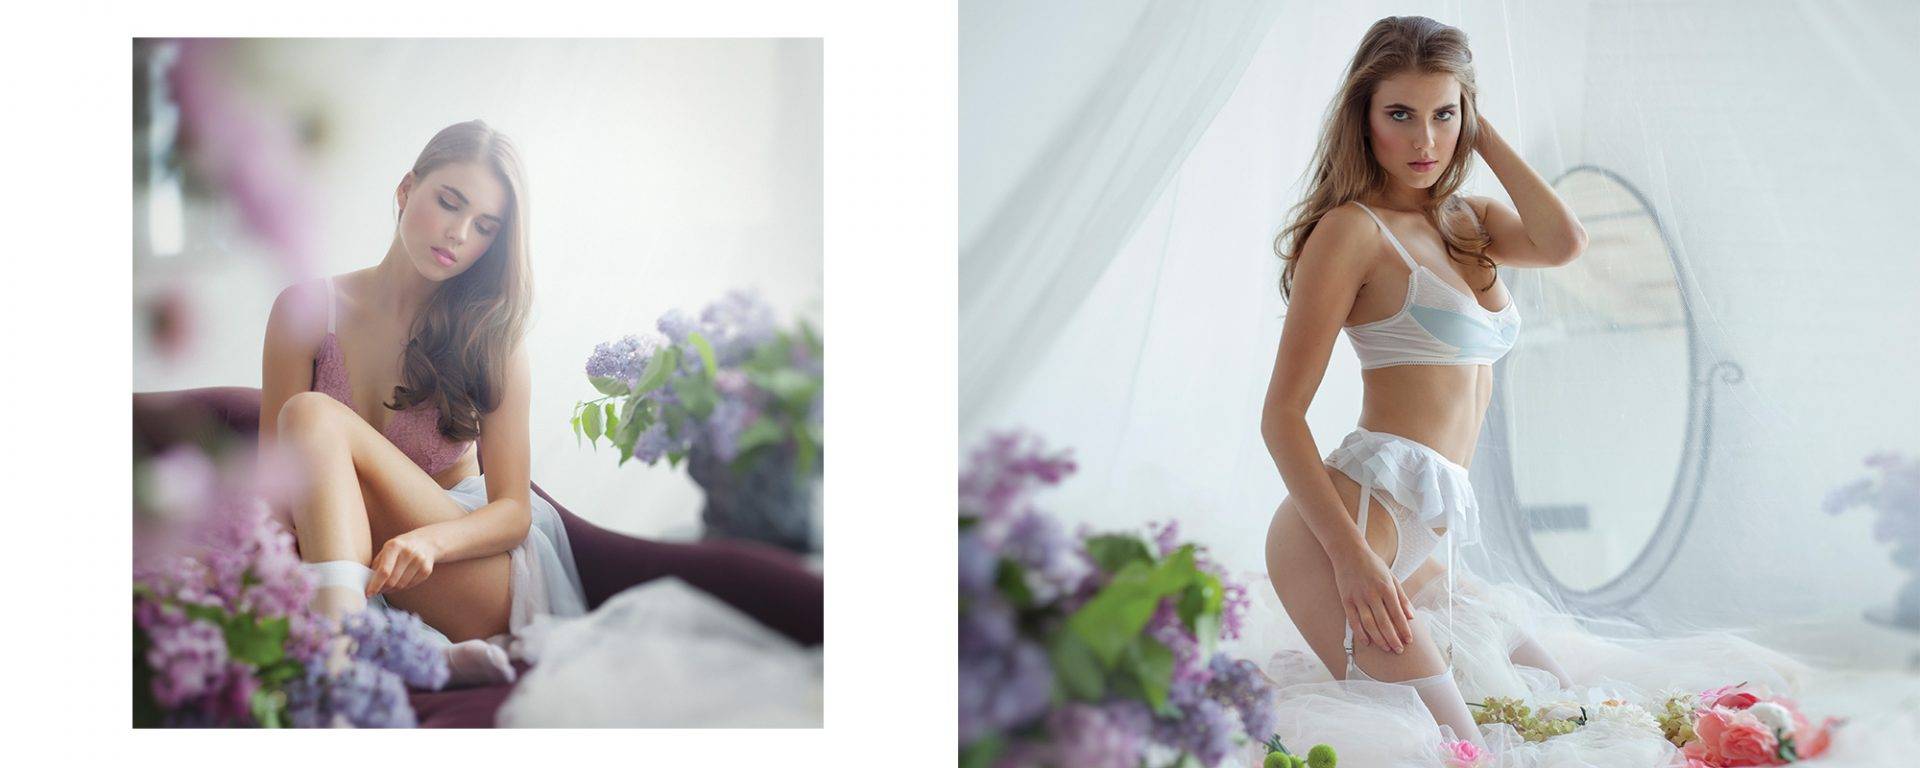 Portraits in lingerie and fresh flowers.